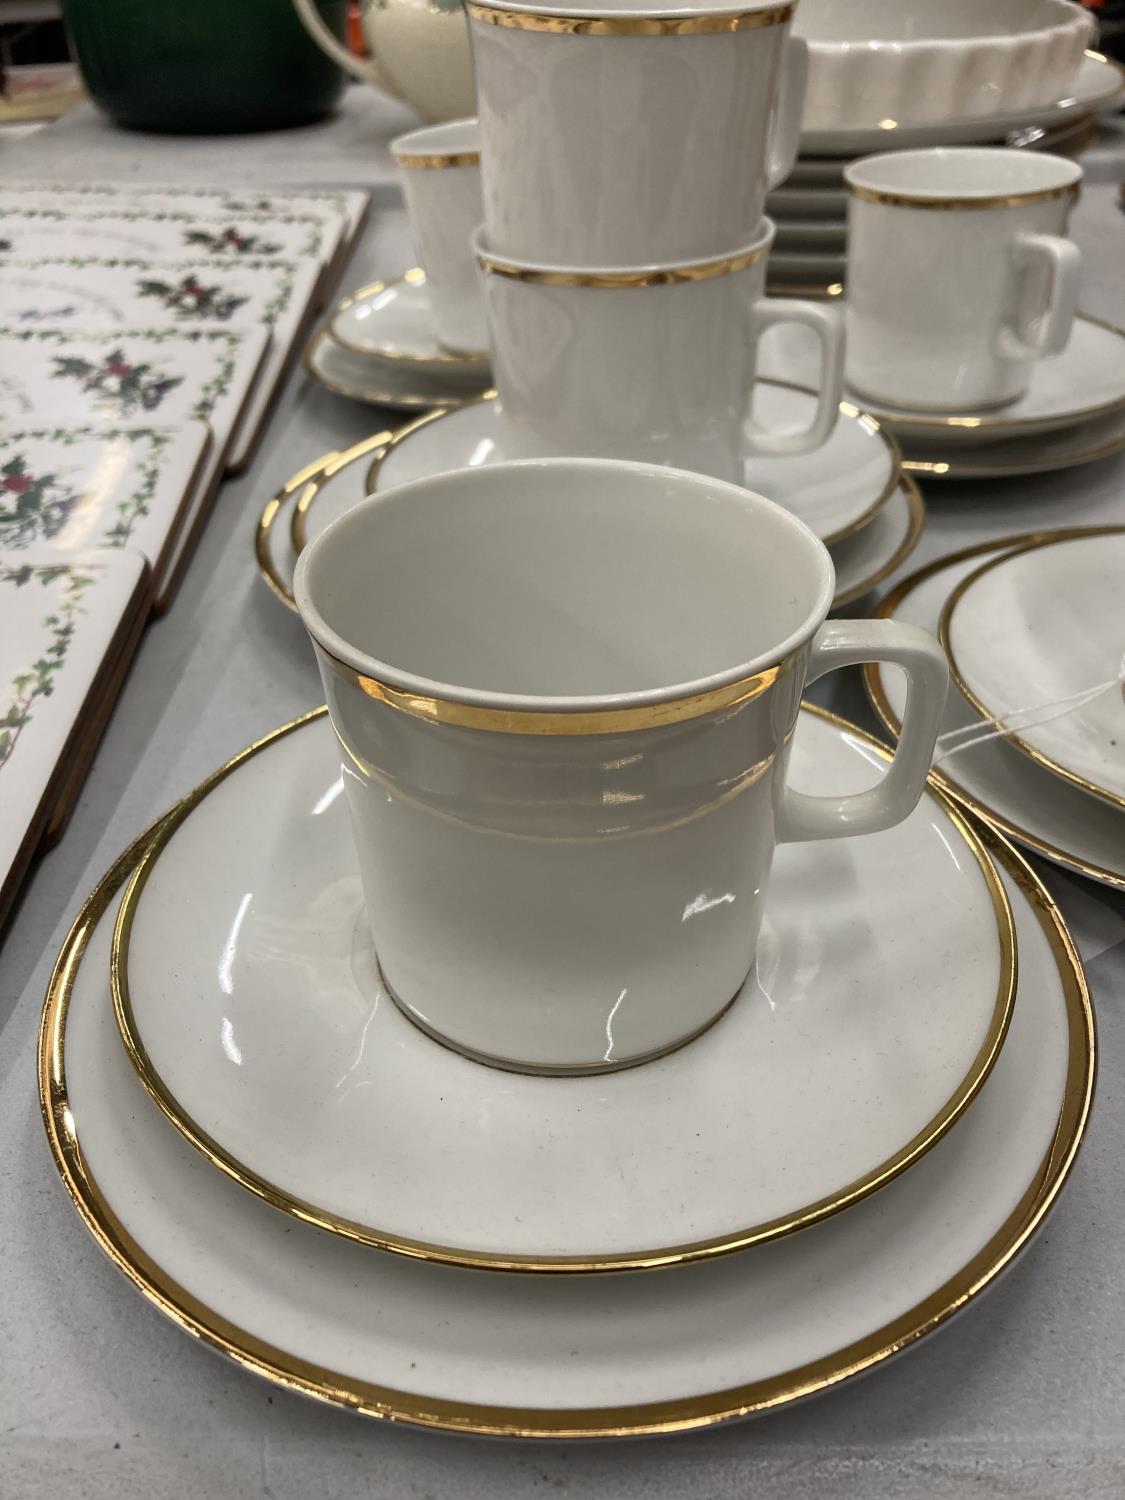 AN ESCHENBACH GERMAN PART DINNER SERVICE TO INCLUDE VARIOUS SIZED PLATES, BOWLS, CUPS, SAUCERS, ETC - Image 2 of 4